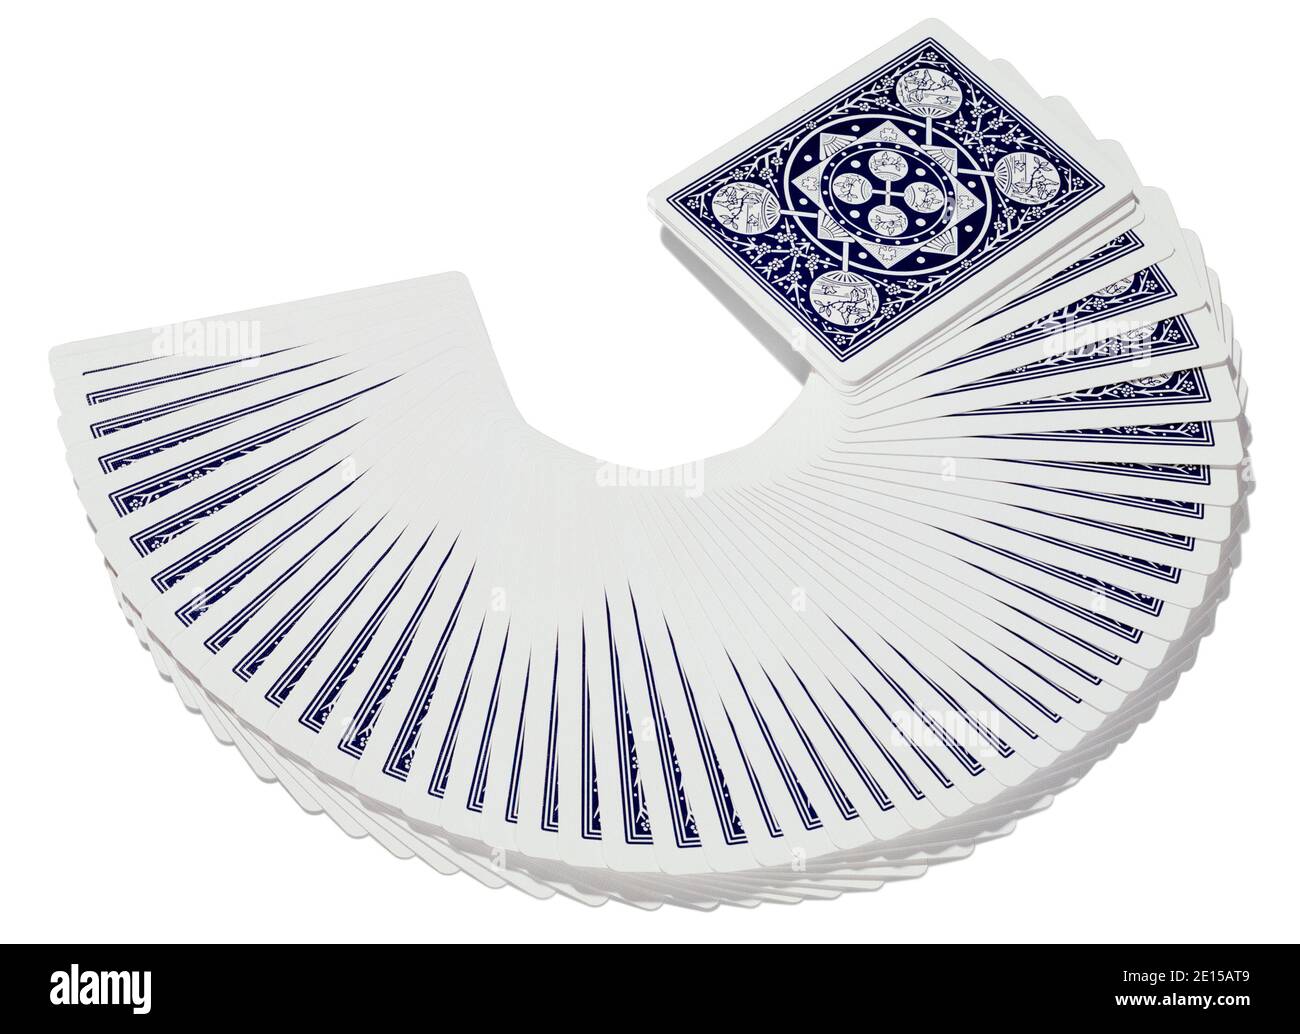 Fanned Bicycle playing cards photographed on a white background Stock Photo